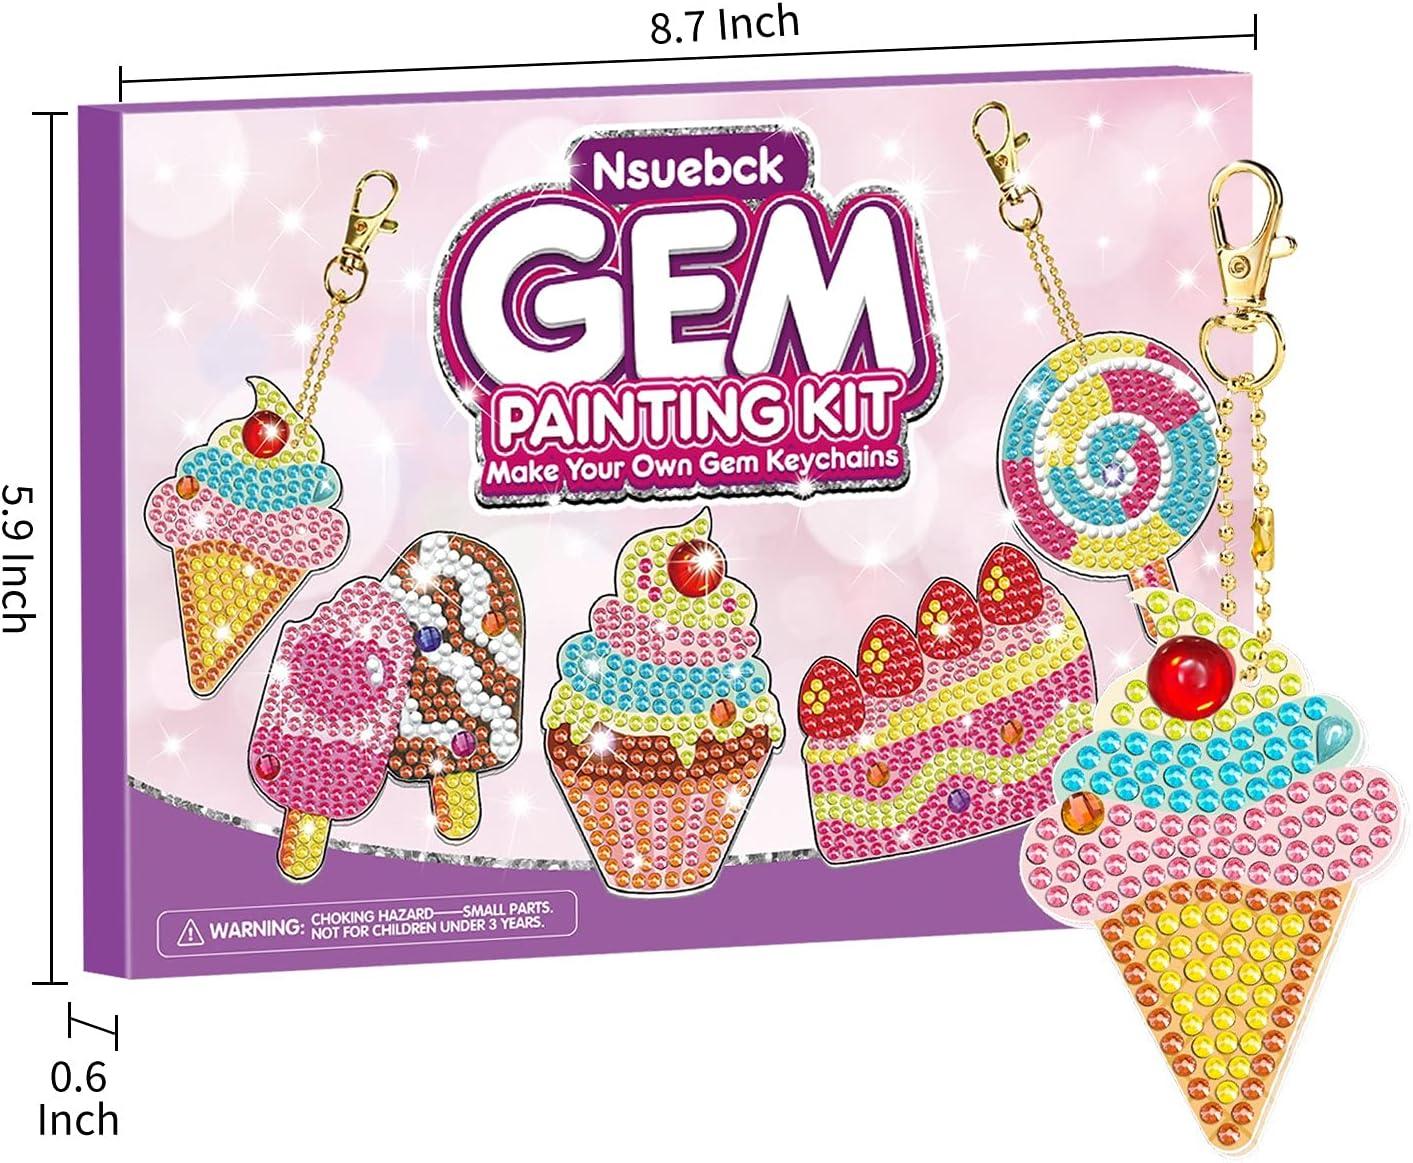 Brass Tacks Kits for Crafty Kids Gem Painting Kit- Make Your Own Keychains- Diamond Art Painting by Numbers for Girls, Boys, Kids (Tool Kit (2-Pack))